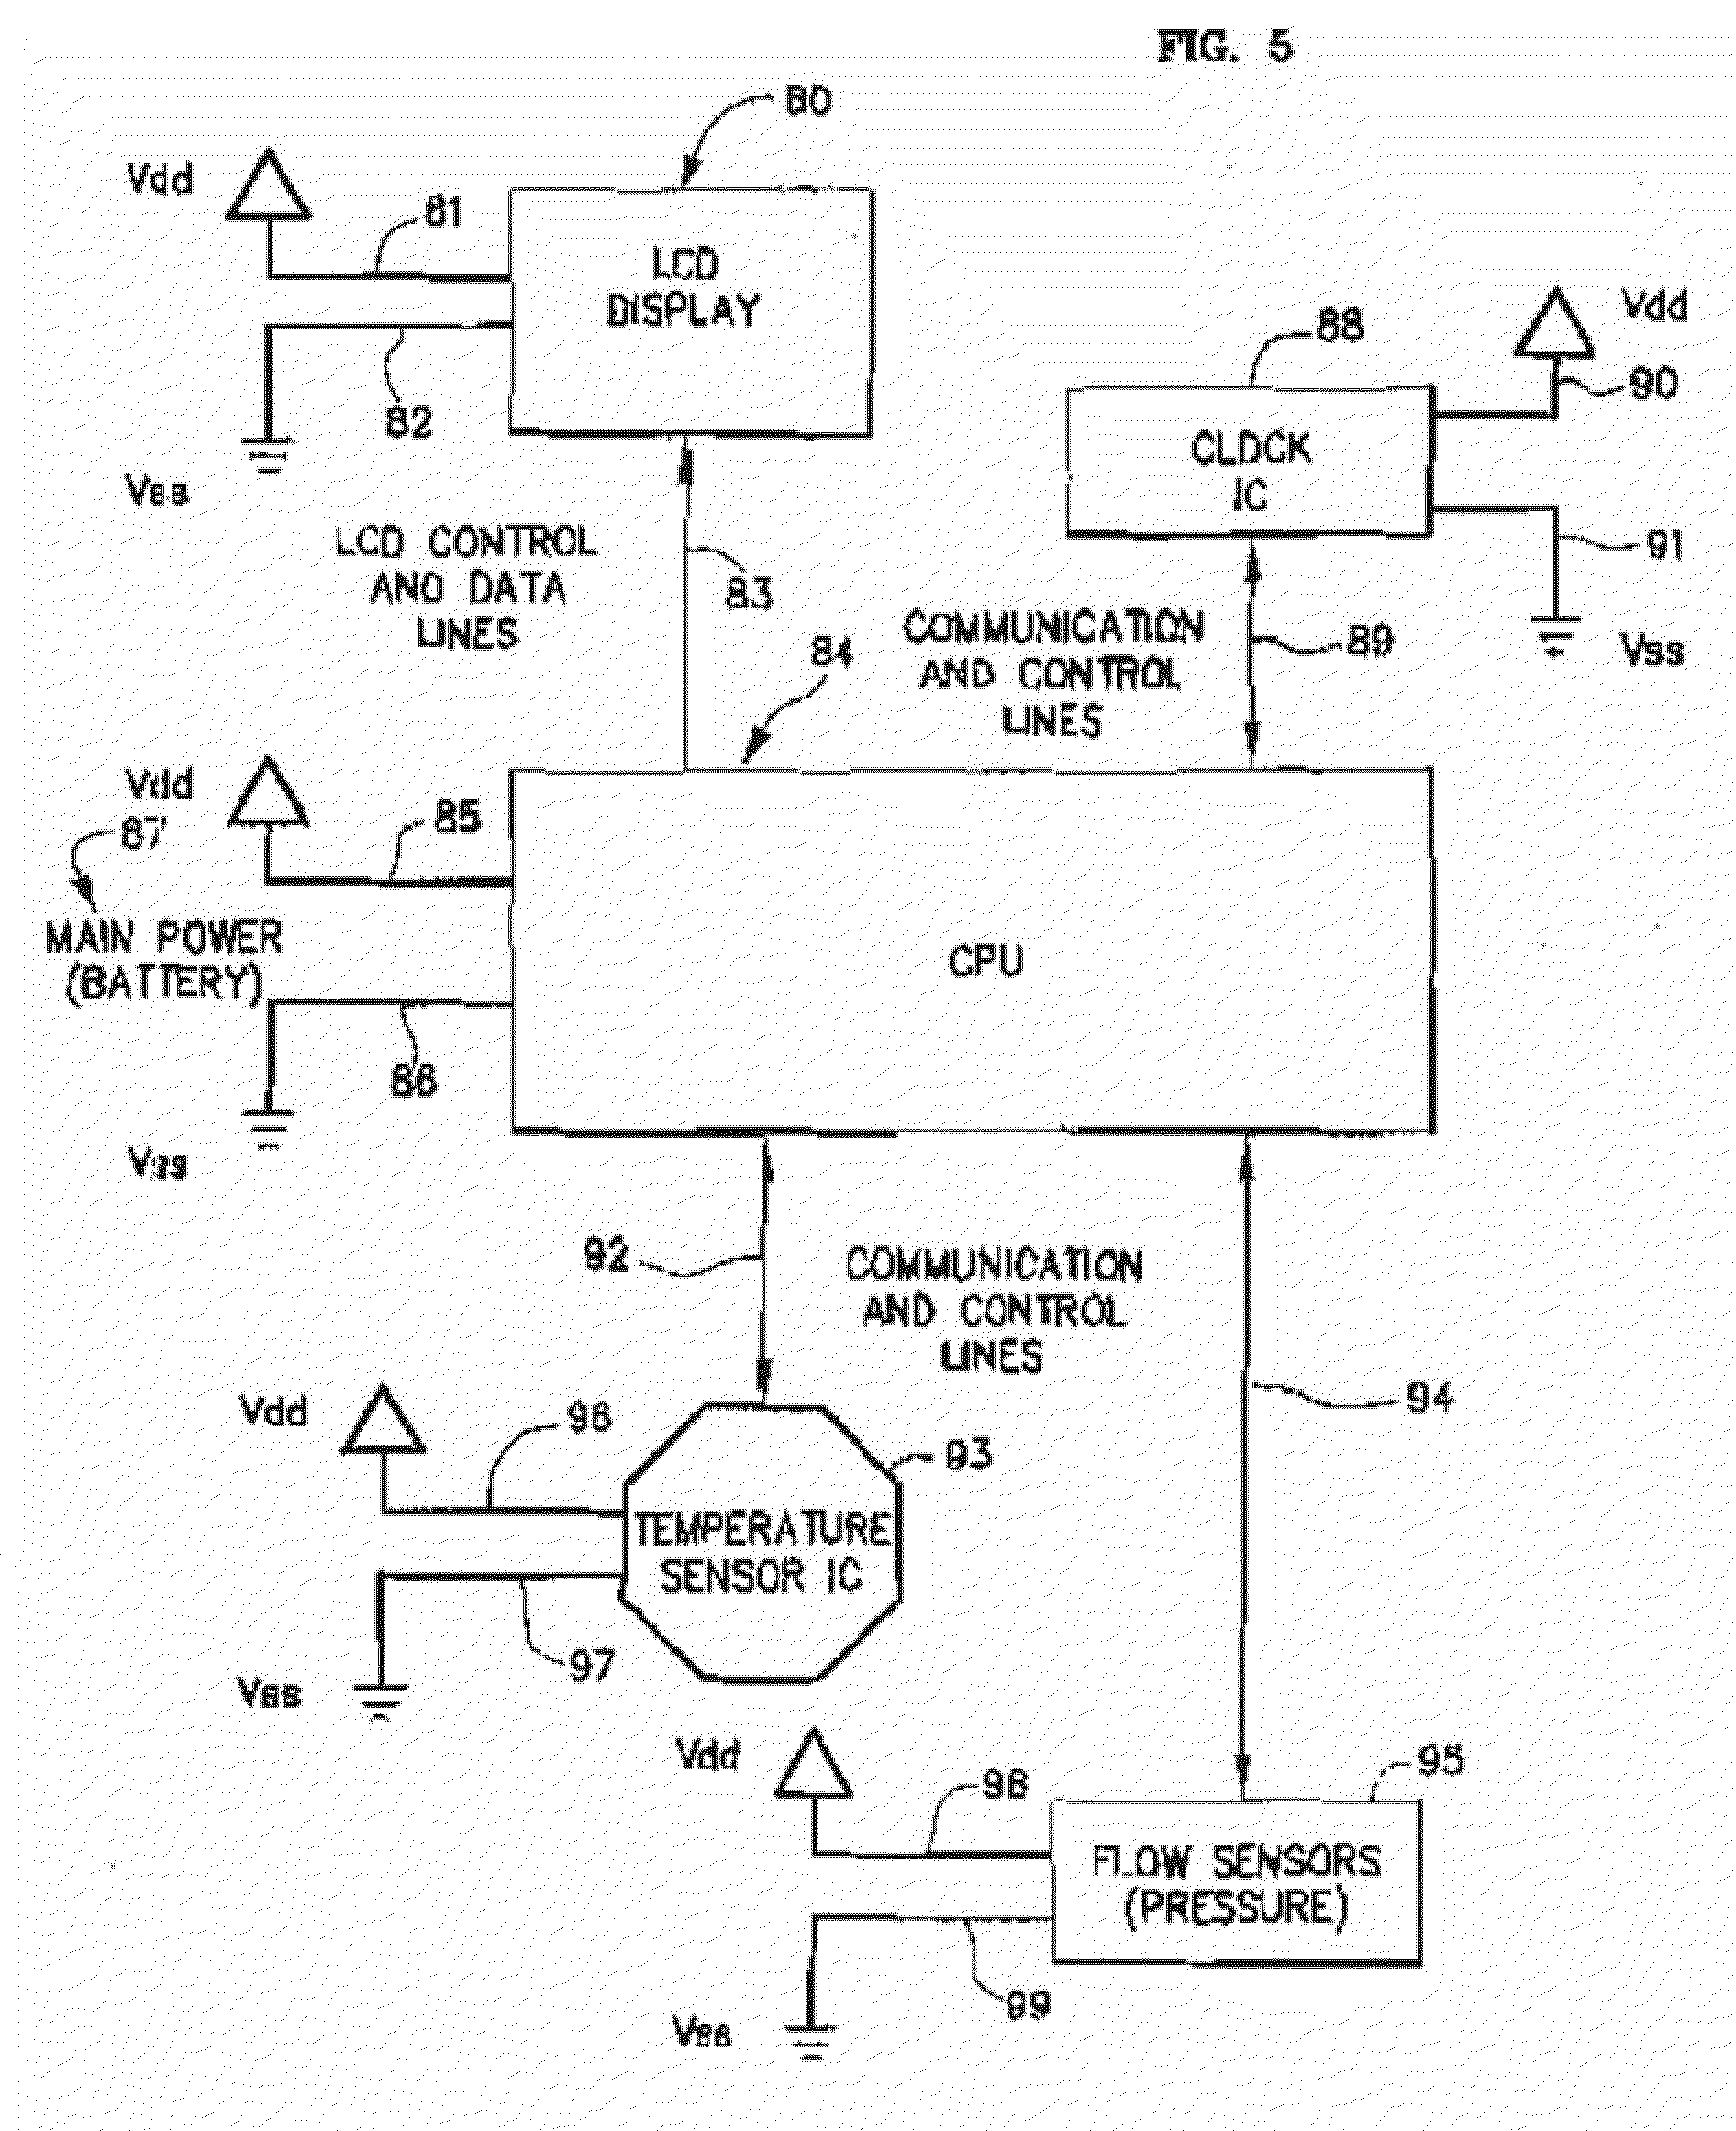 Apparatus for Displaying Shower or Bath Water Parameters